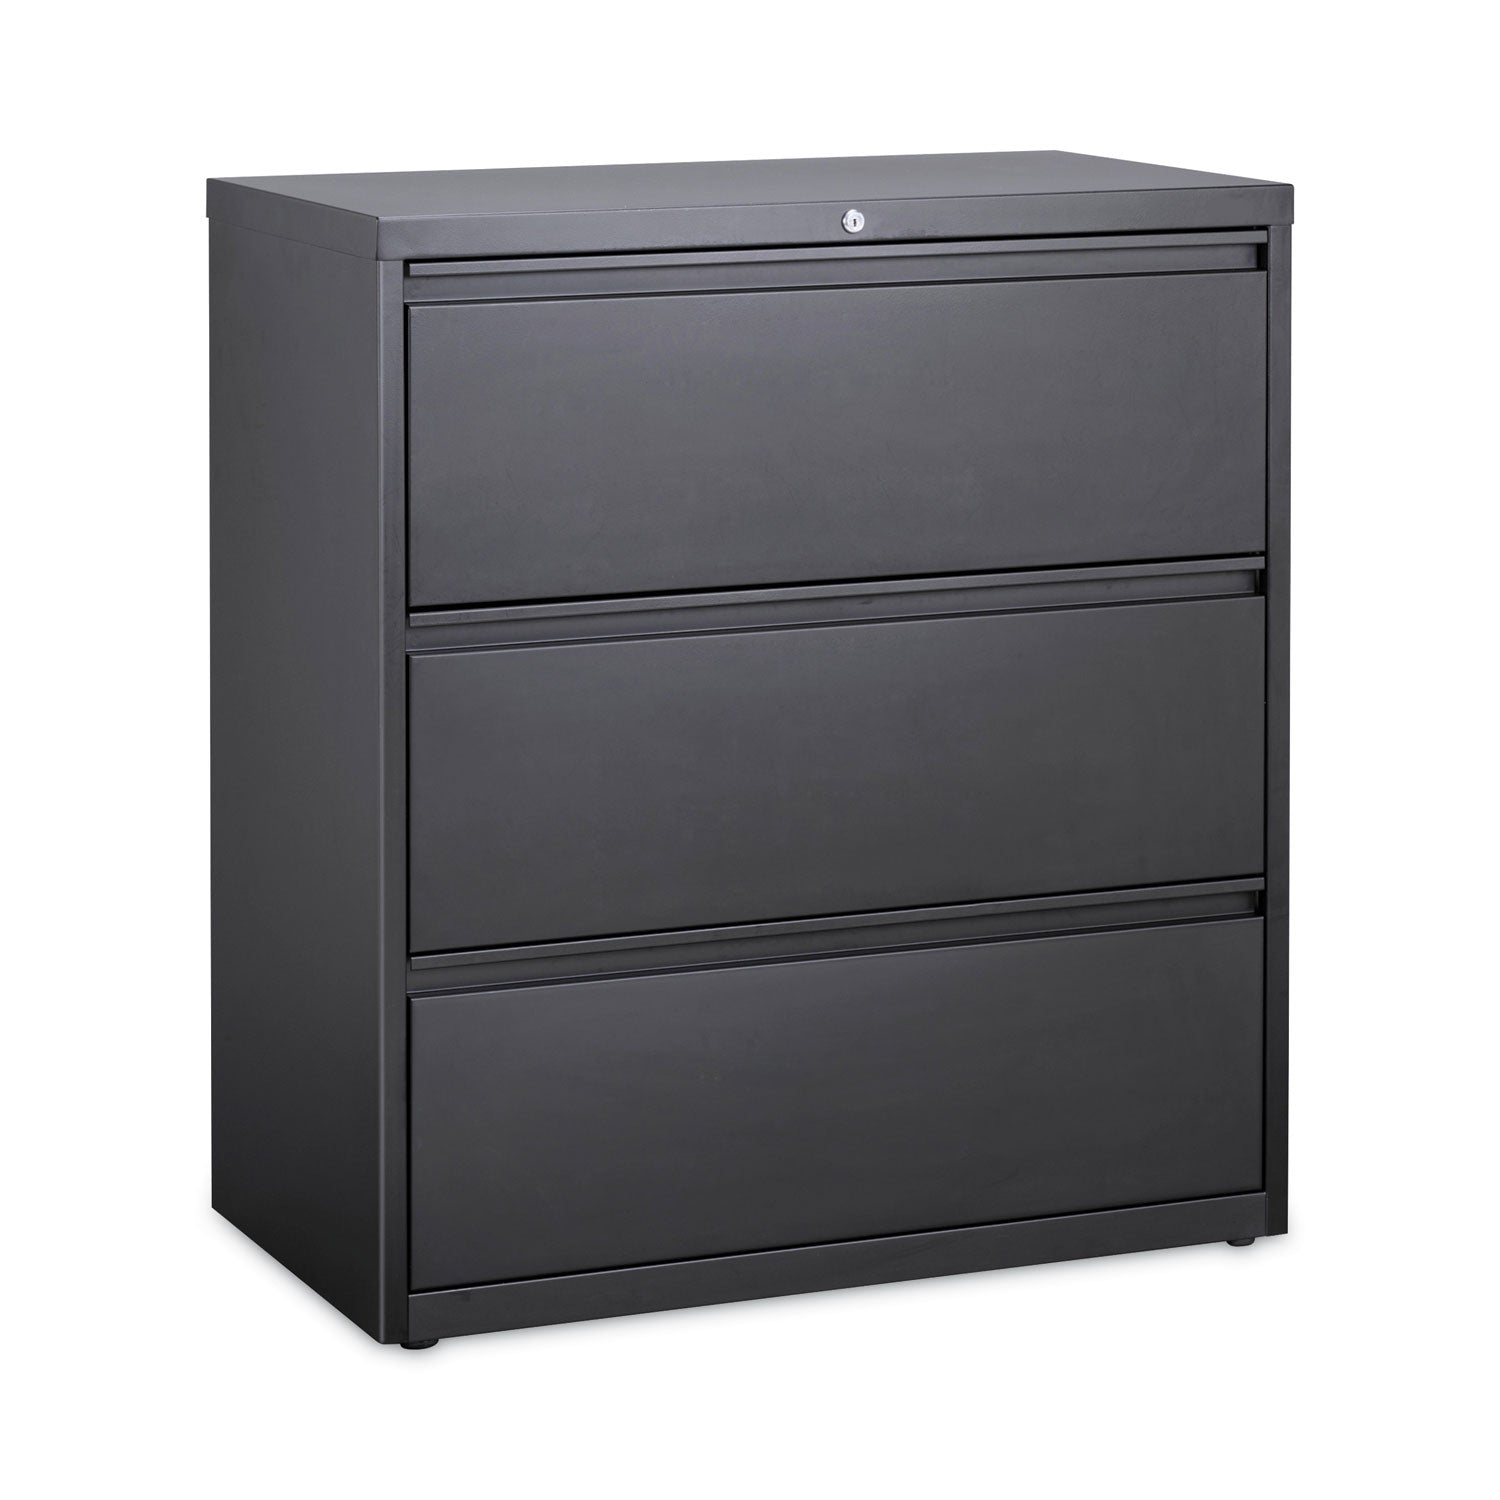 lateral-file-cabinet-3-letter-legal-a4-size-file-drawers-charcoal-36-x-1862-x-4025_hid16066 - 2